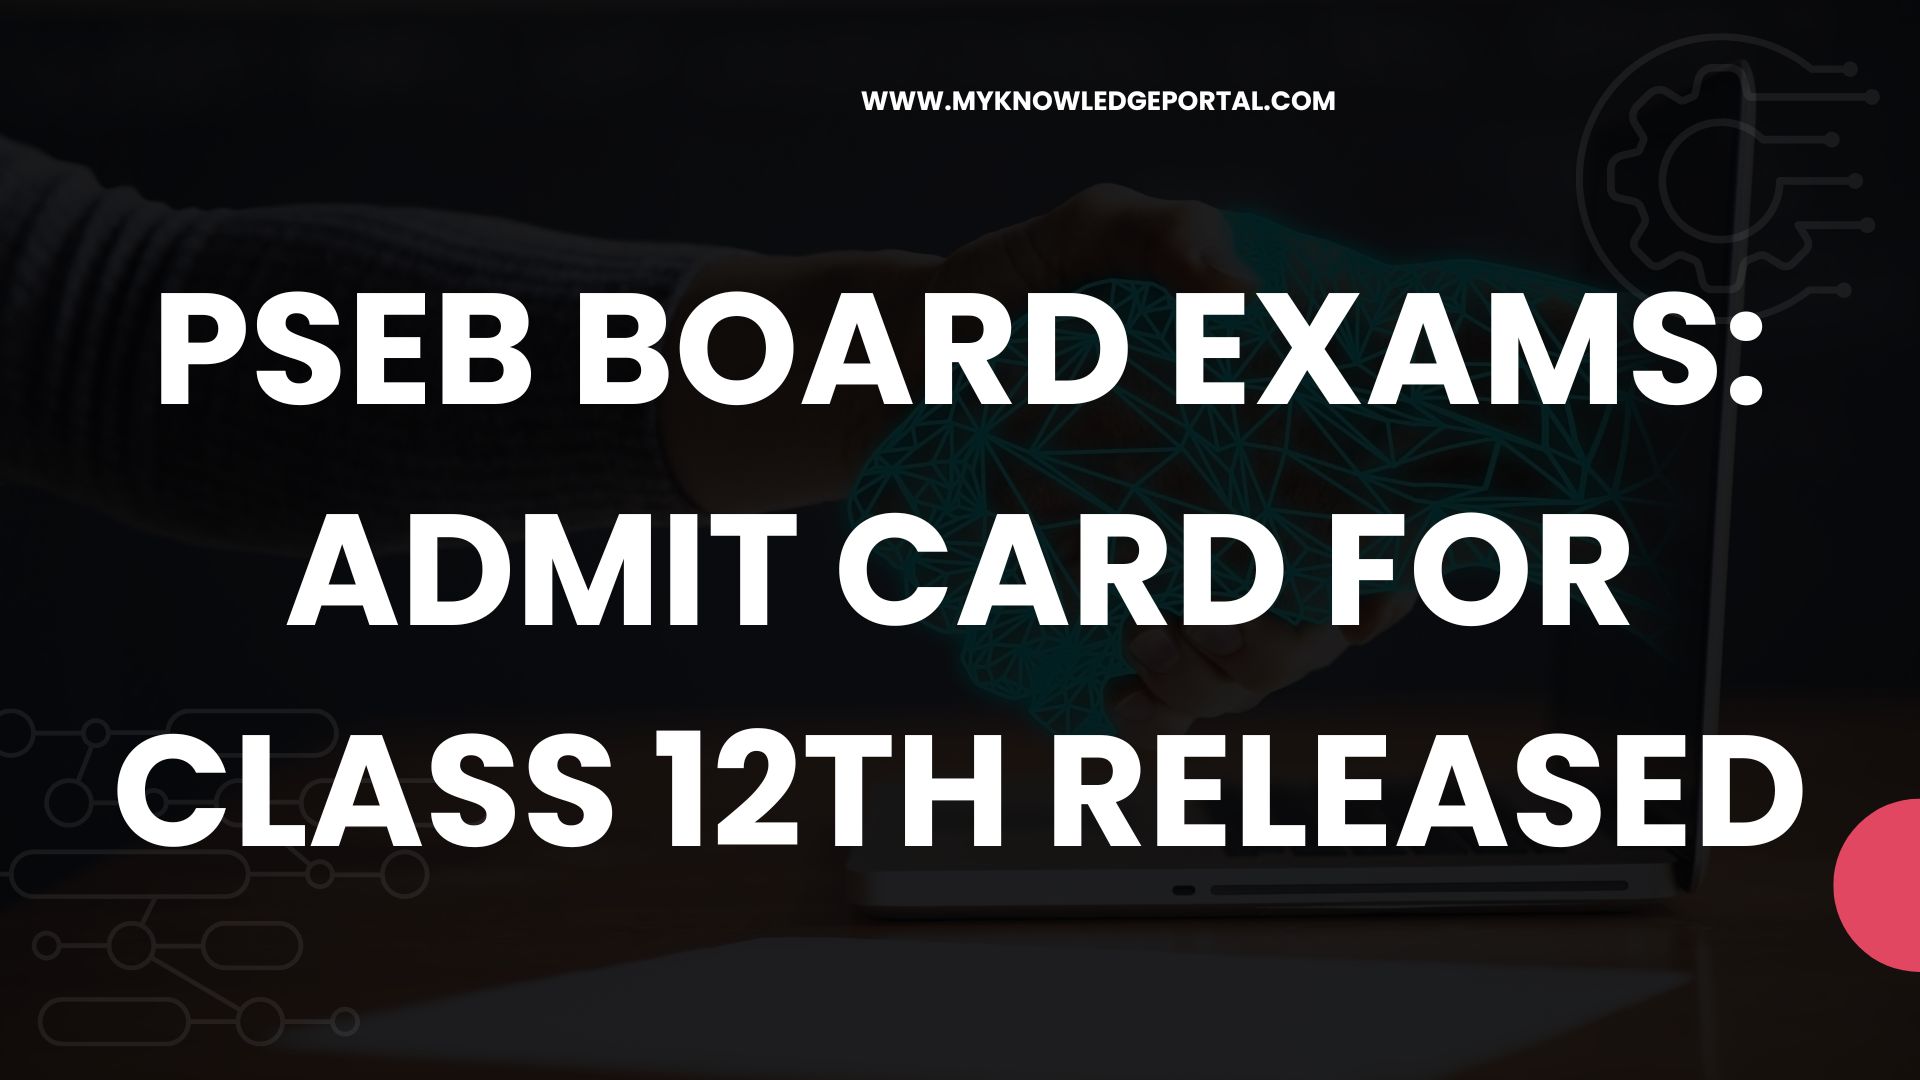 PSEB Board Exams: Admit Card for class 12th released